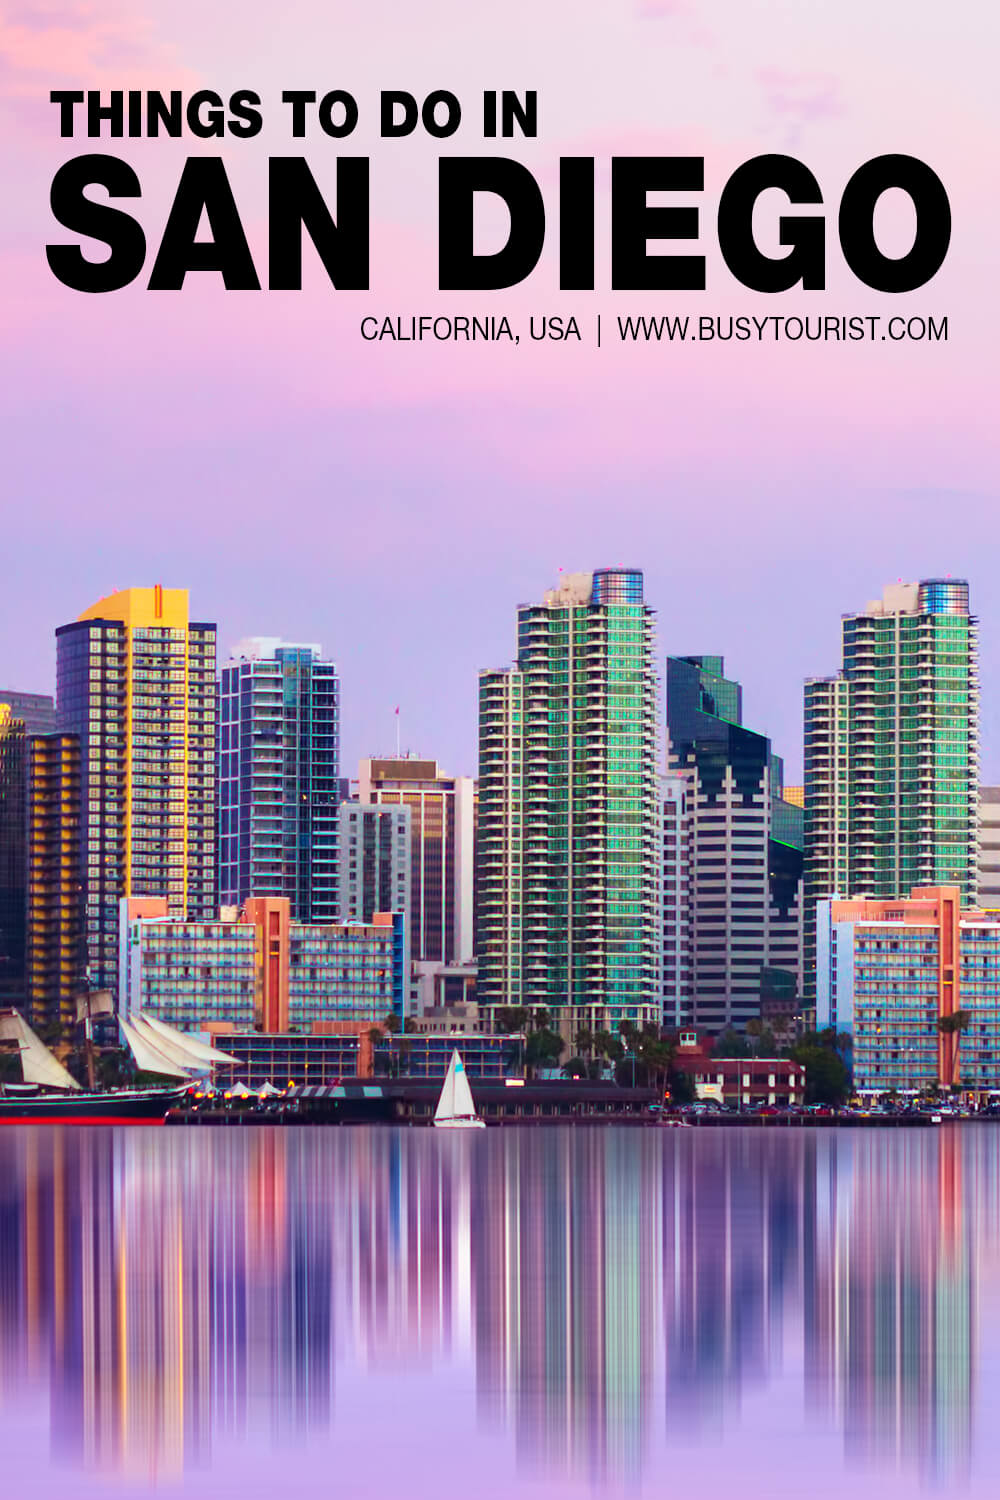 57 Best & Fun Things To Do In San Diego (CA) Attractions & Activities